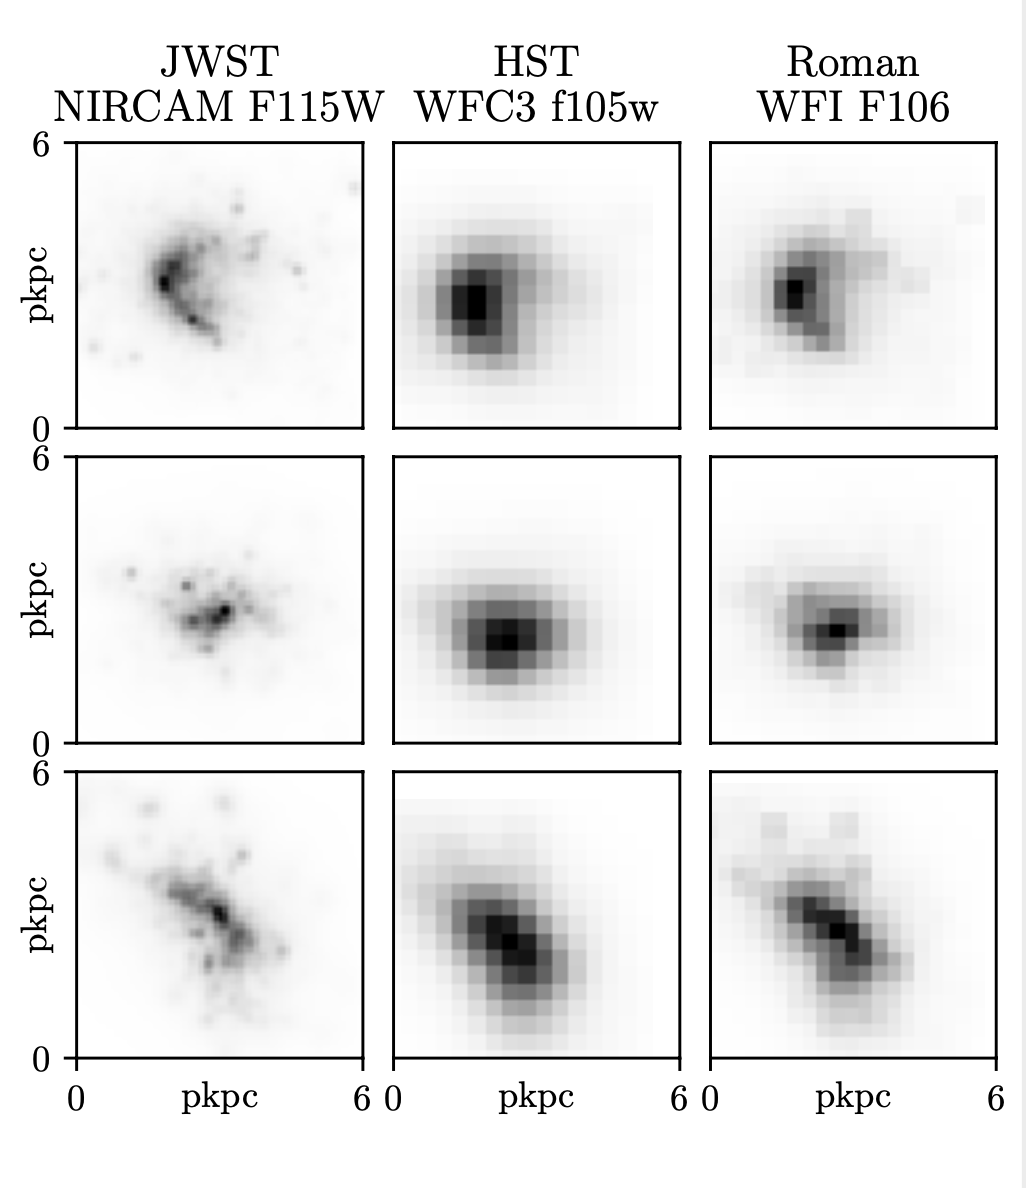 Y band images of three simulated z=7 galaxies in JWST, HST, Roman filters.